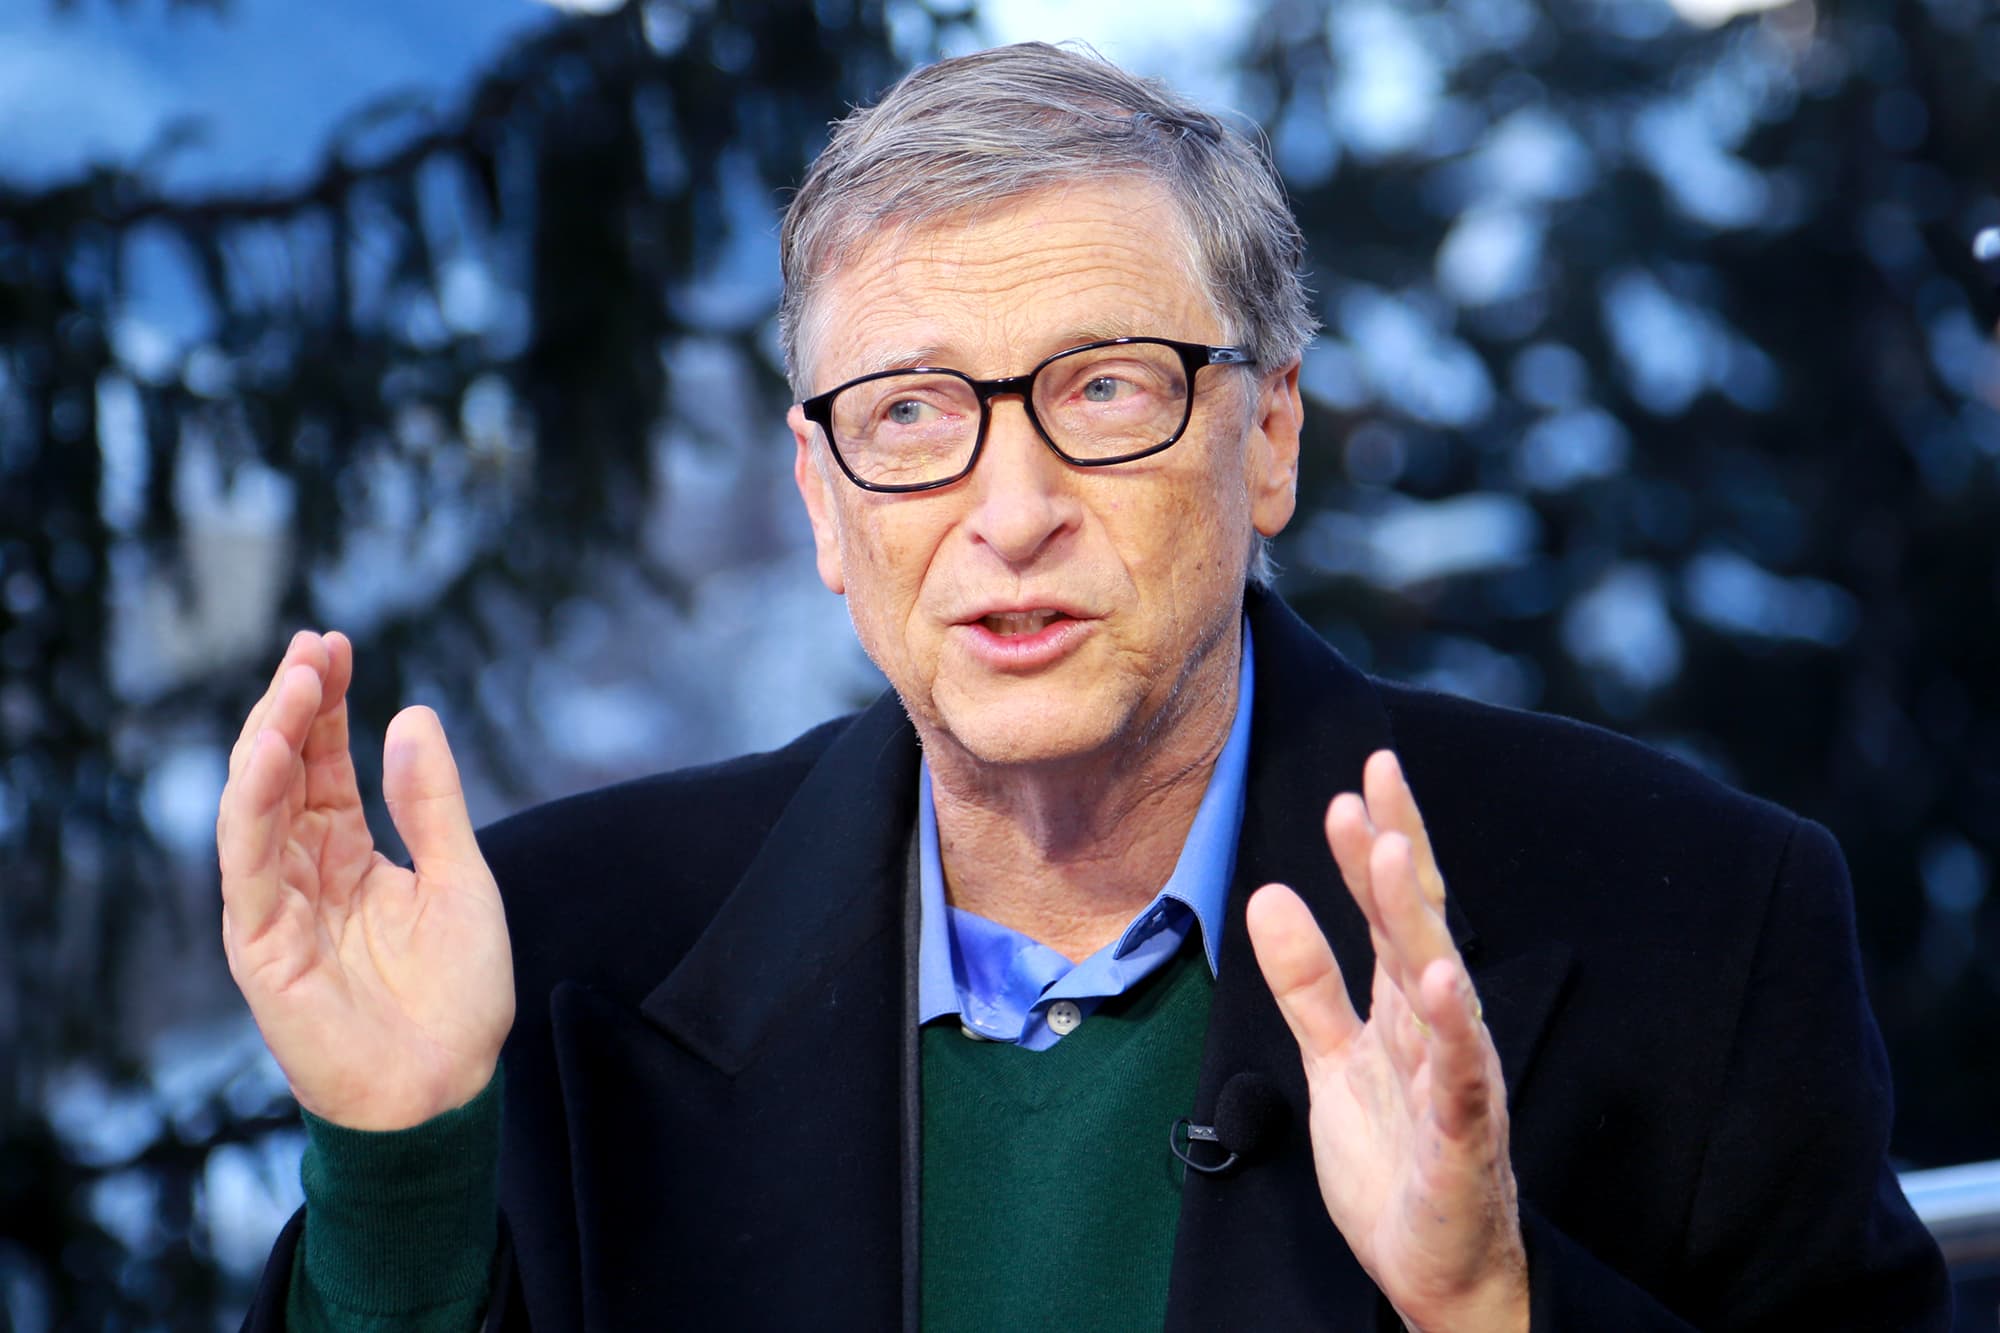 Bill Gates says he will fly less to fight climate change